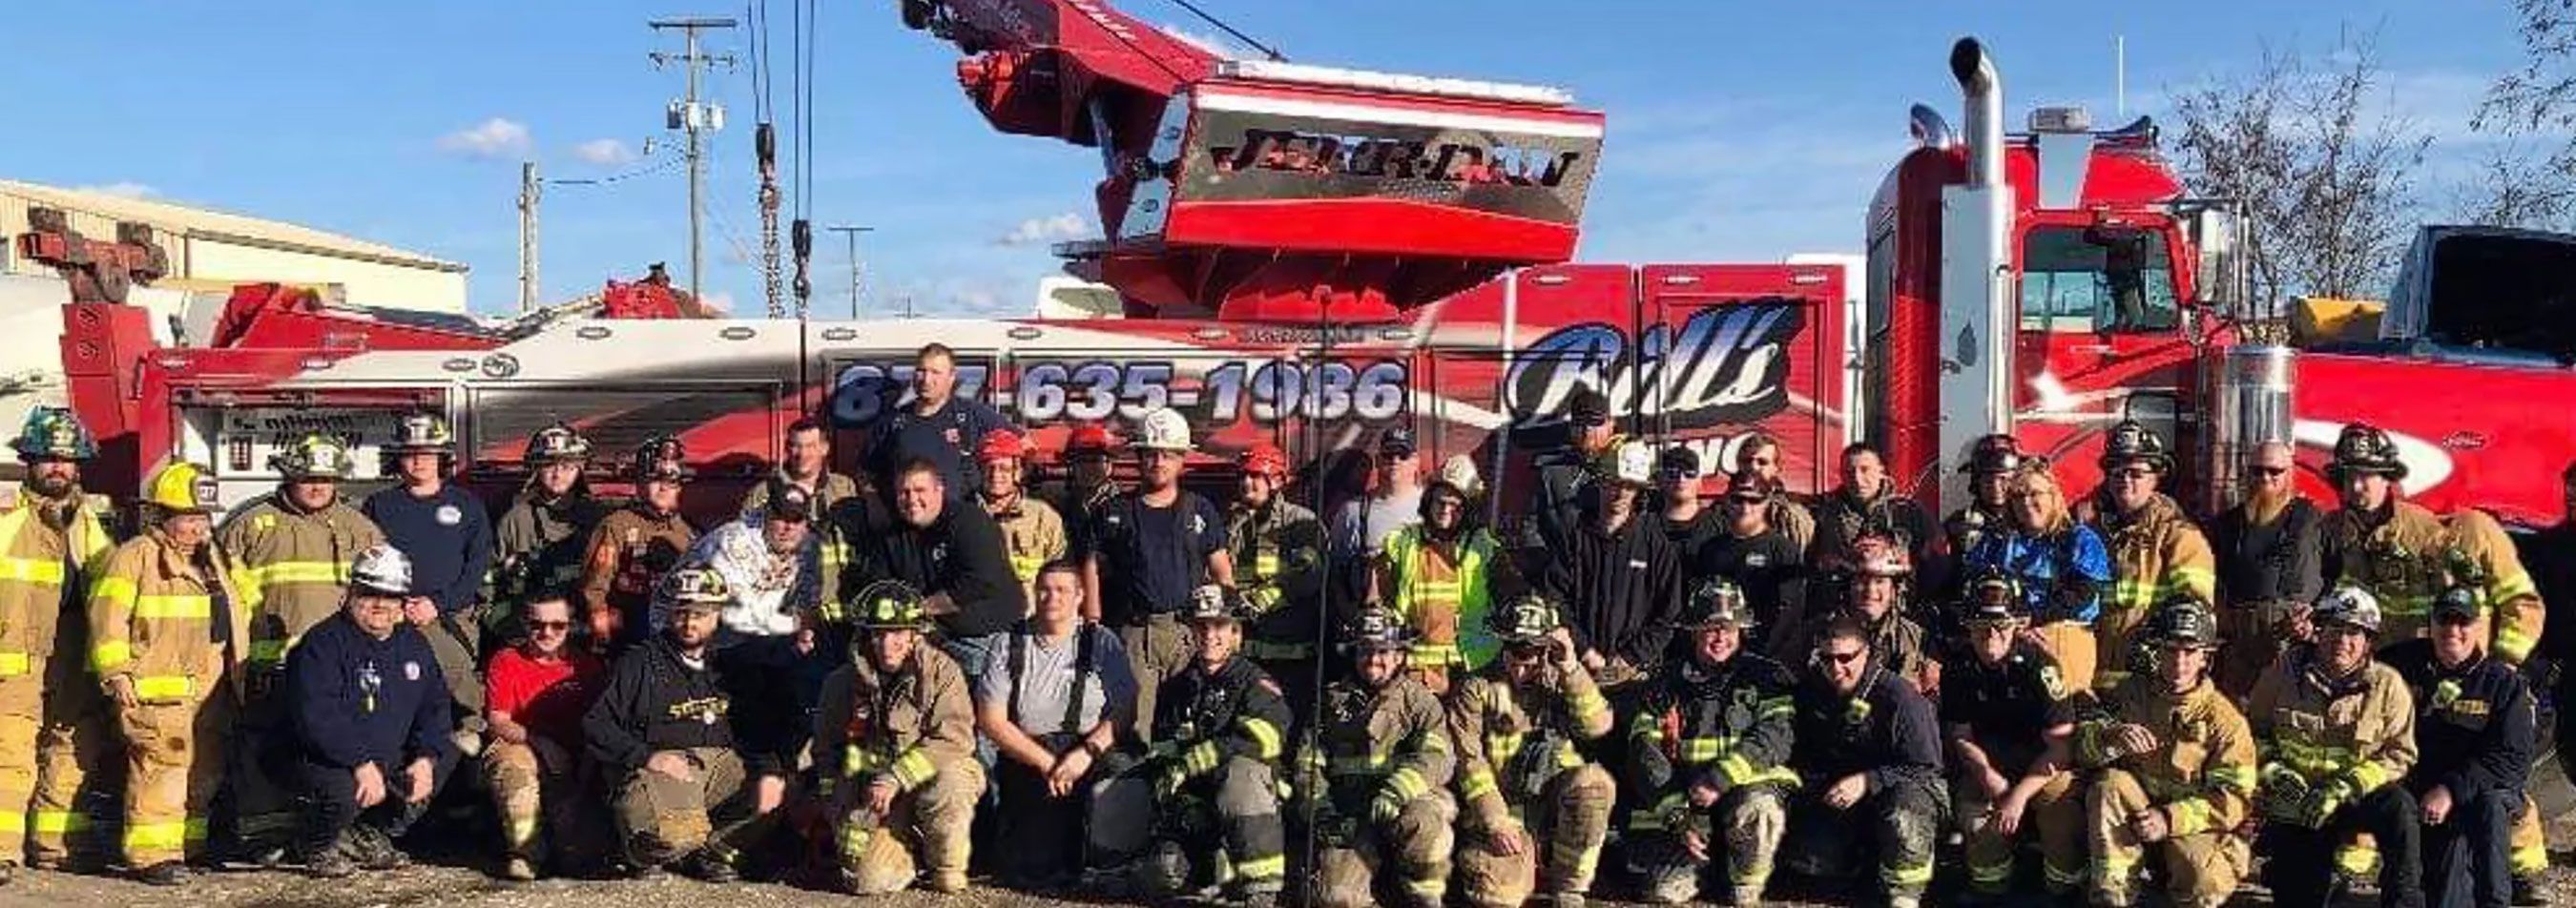 BILL'S TOWING SUPPORTS OUR FIRST RESPONDERS